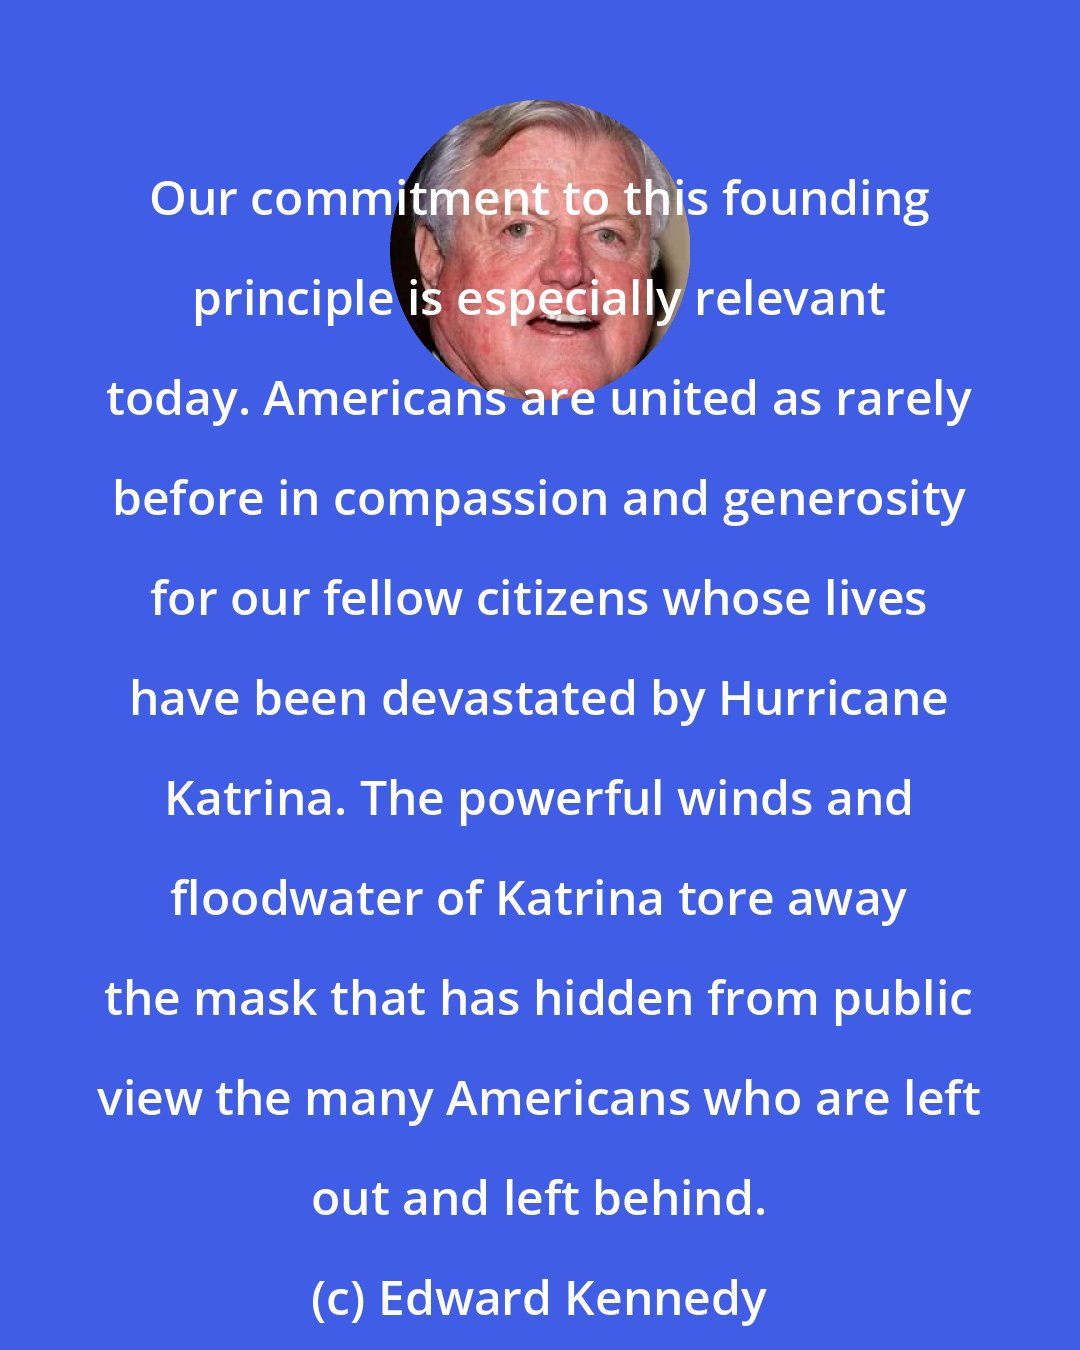 Edward Kennedy: Our commitment to this founding principle is especially relevant today. Americans are united as rarely before in compassion and generosity for our fellow citizens whose lives have been devastated by Hurricane Katrina. The powerful winds and floodwater of Katrina tore away the mask that has hidden from public view the many Americans who are left out and left behind.